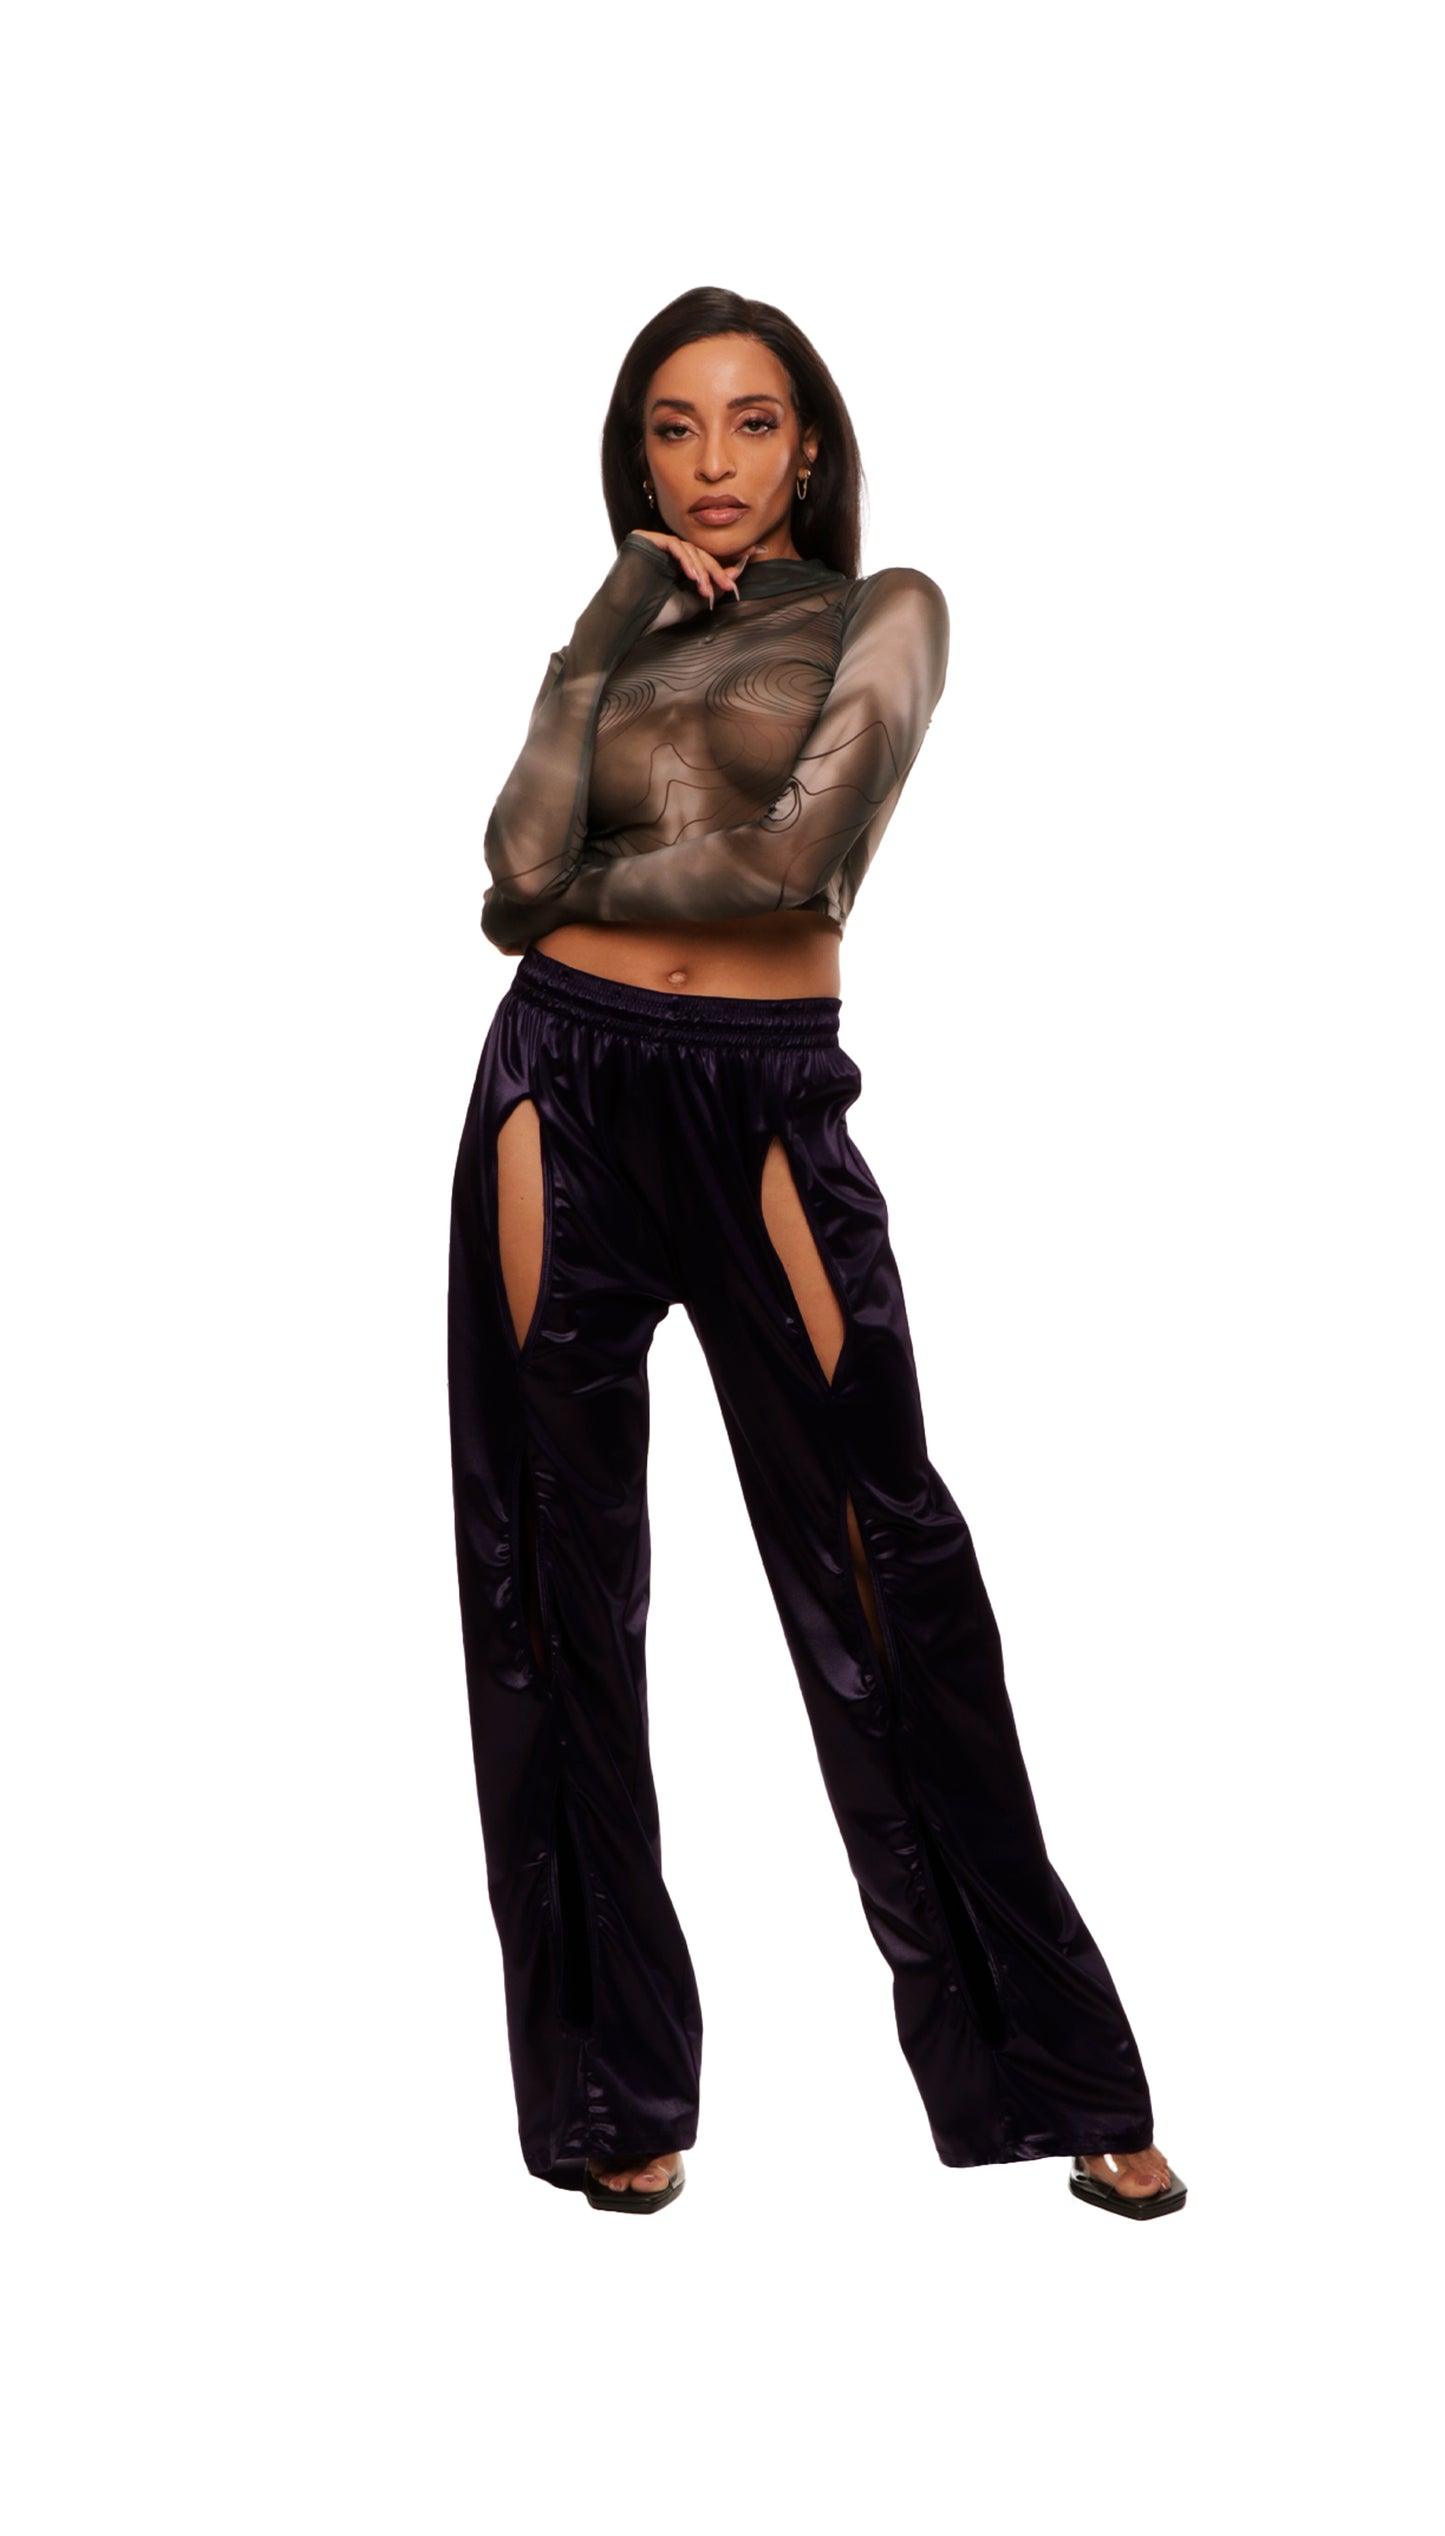 Woman who looks like Beyoncé or Aaliyah wears berry colored stretch smooth nylon pants with open detail front, paired with a grey stretch mesh long sleeve shirt top. Front view.